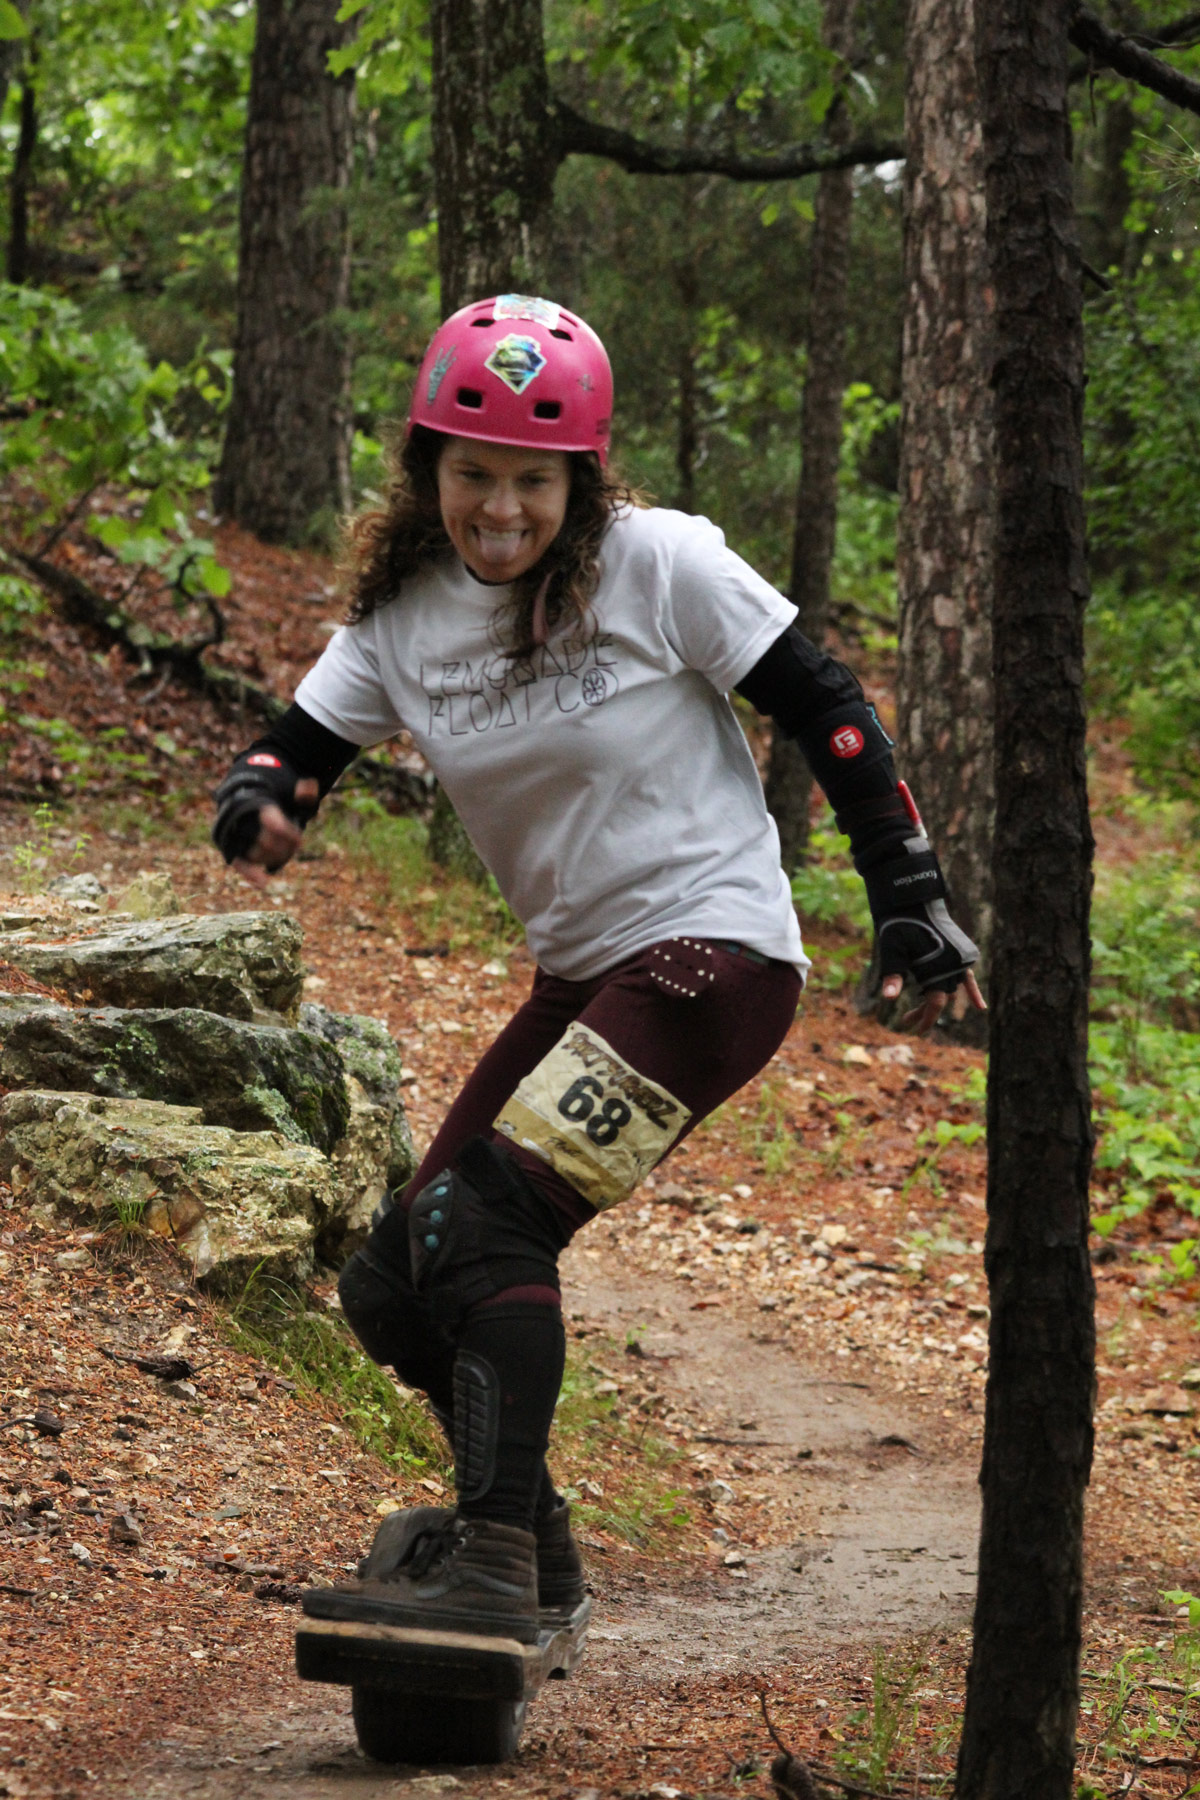 Heather Wrench on the Lord's Prayer section of the DirtSurferz Onewheel race